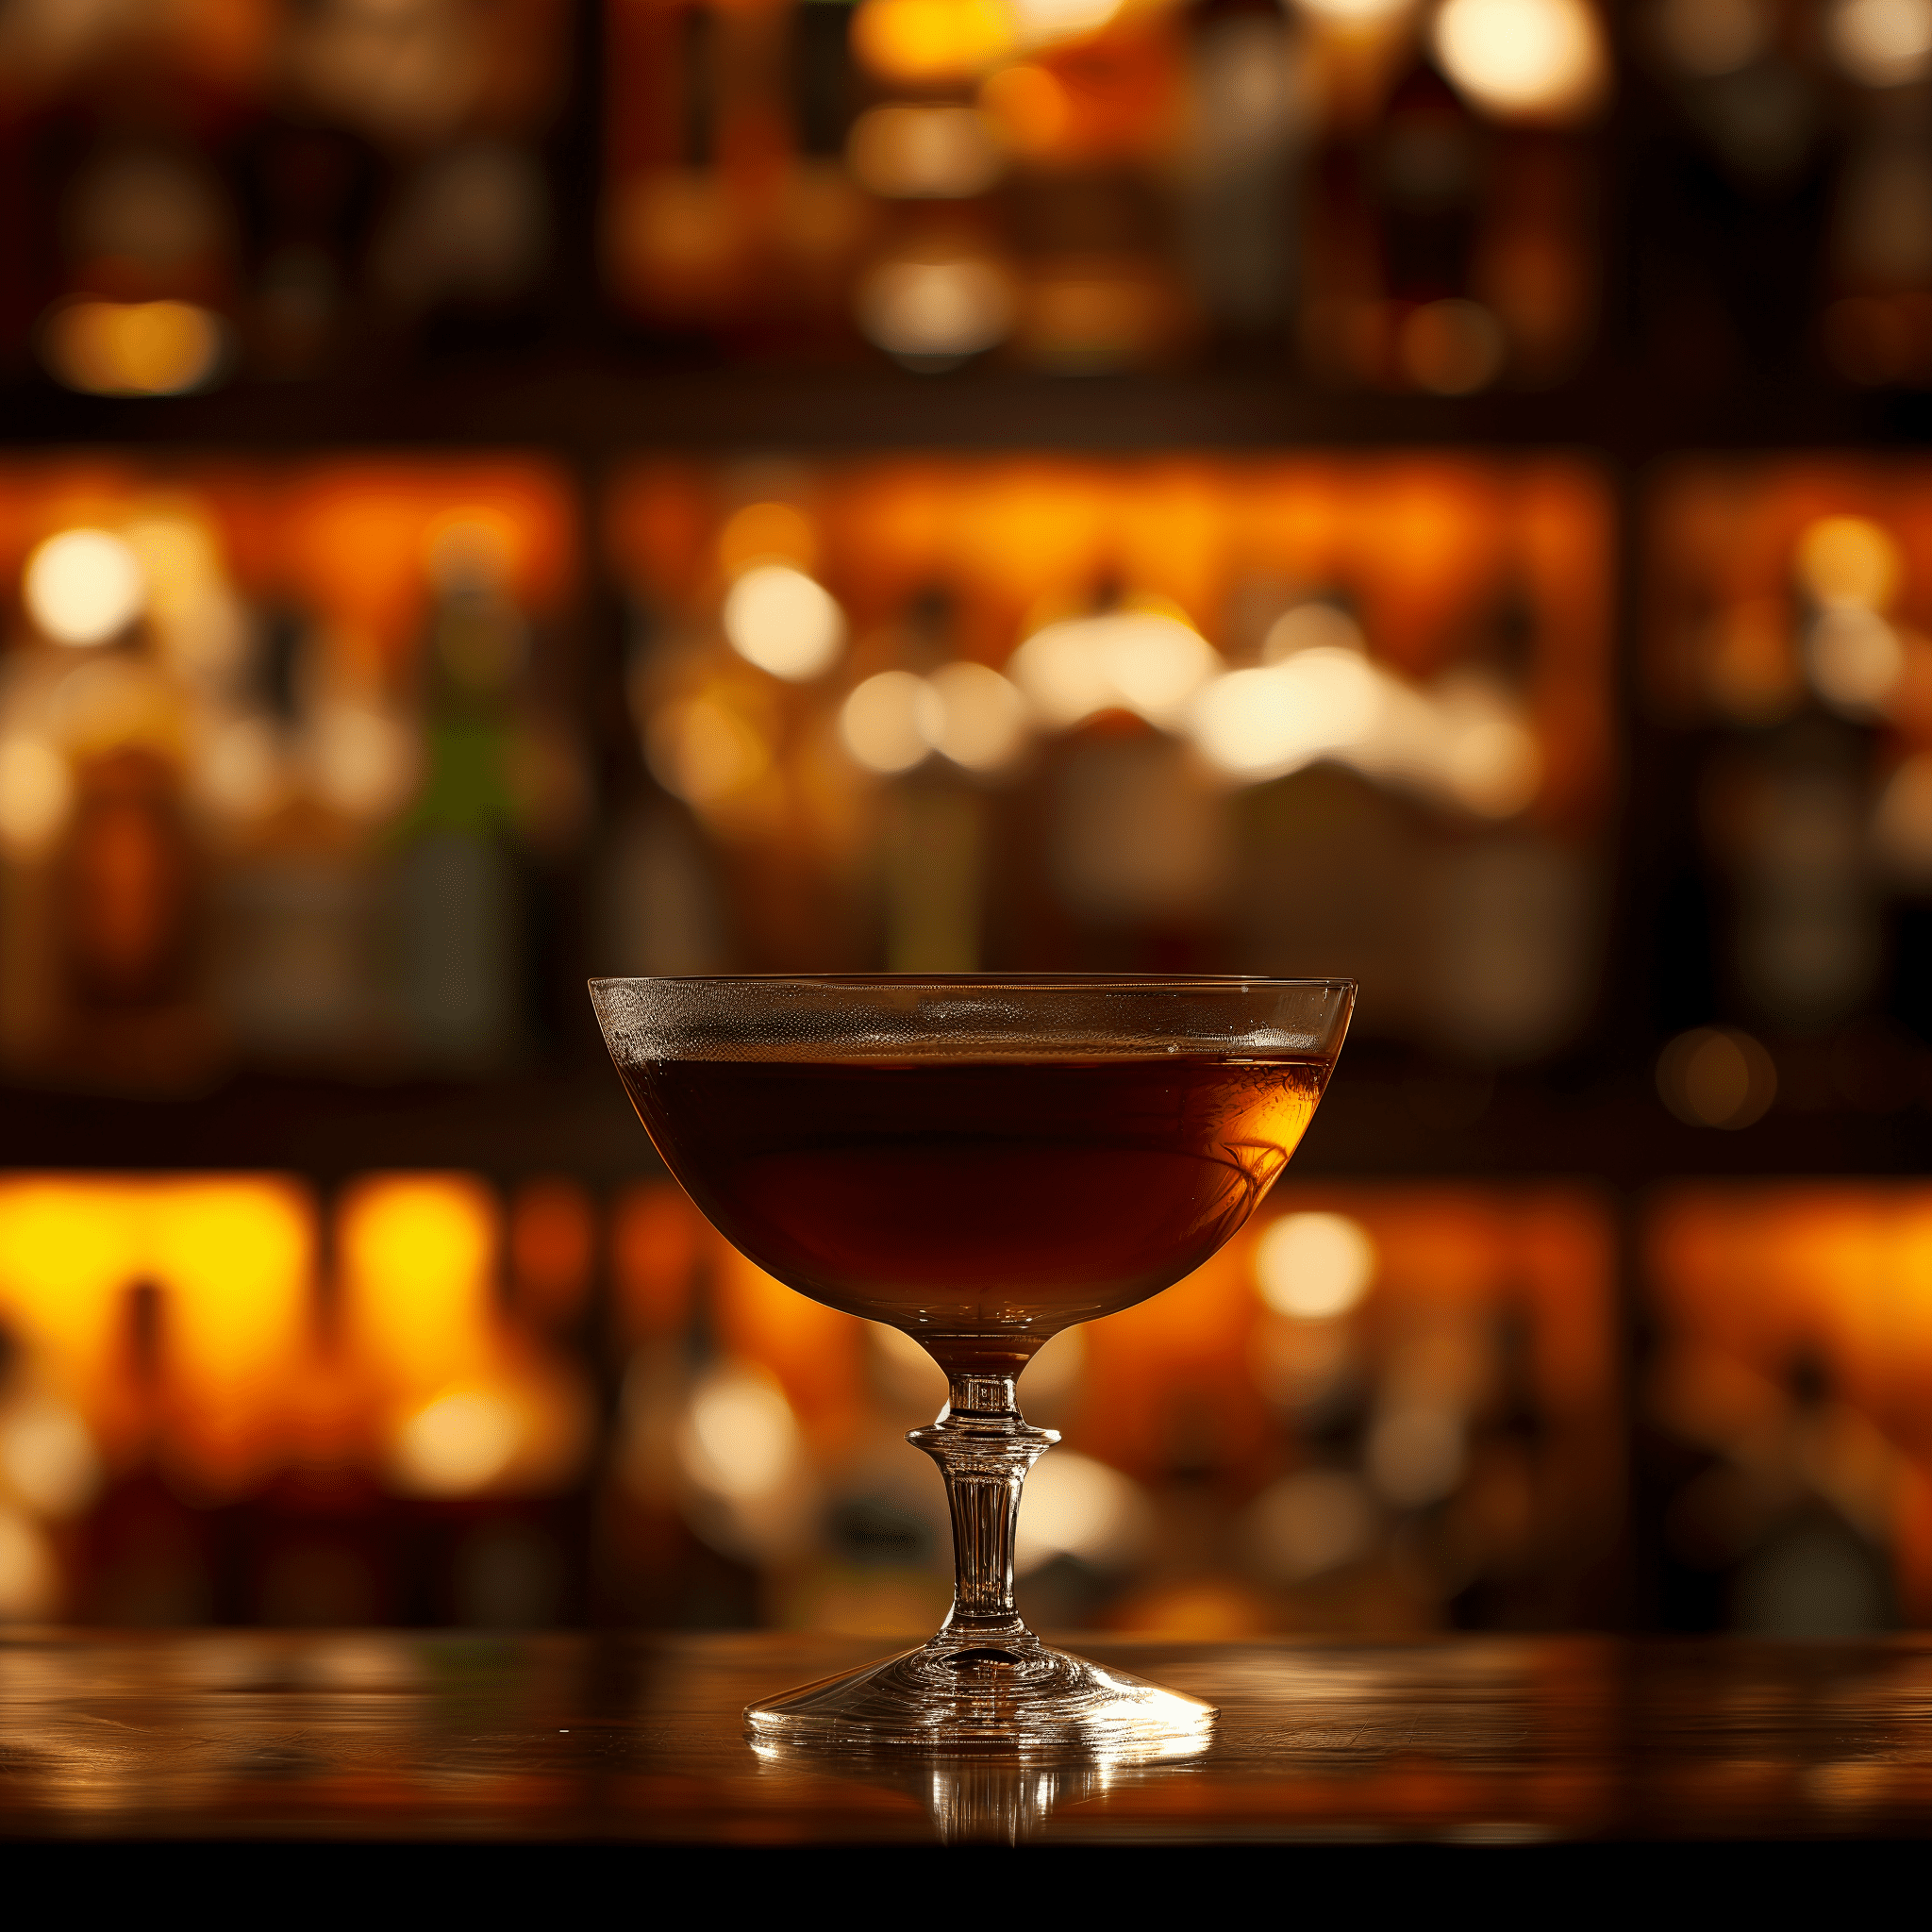 Crow Cocktail Recipe - The Crow cocktail offers a robust flavor profile with the smoky undertones of Scotch whisky complemented by the sharpness of lemon and the subtle sweetness of grenadine. It's a bold, complex, and slightly tart concoction.